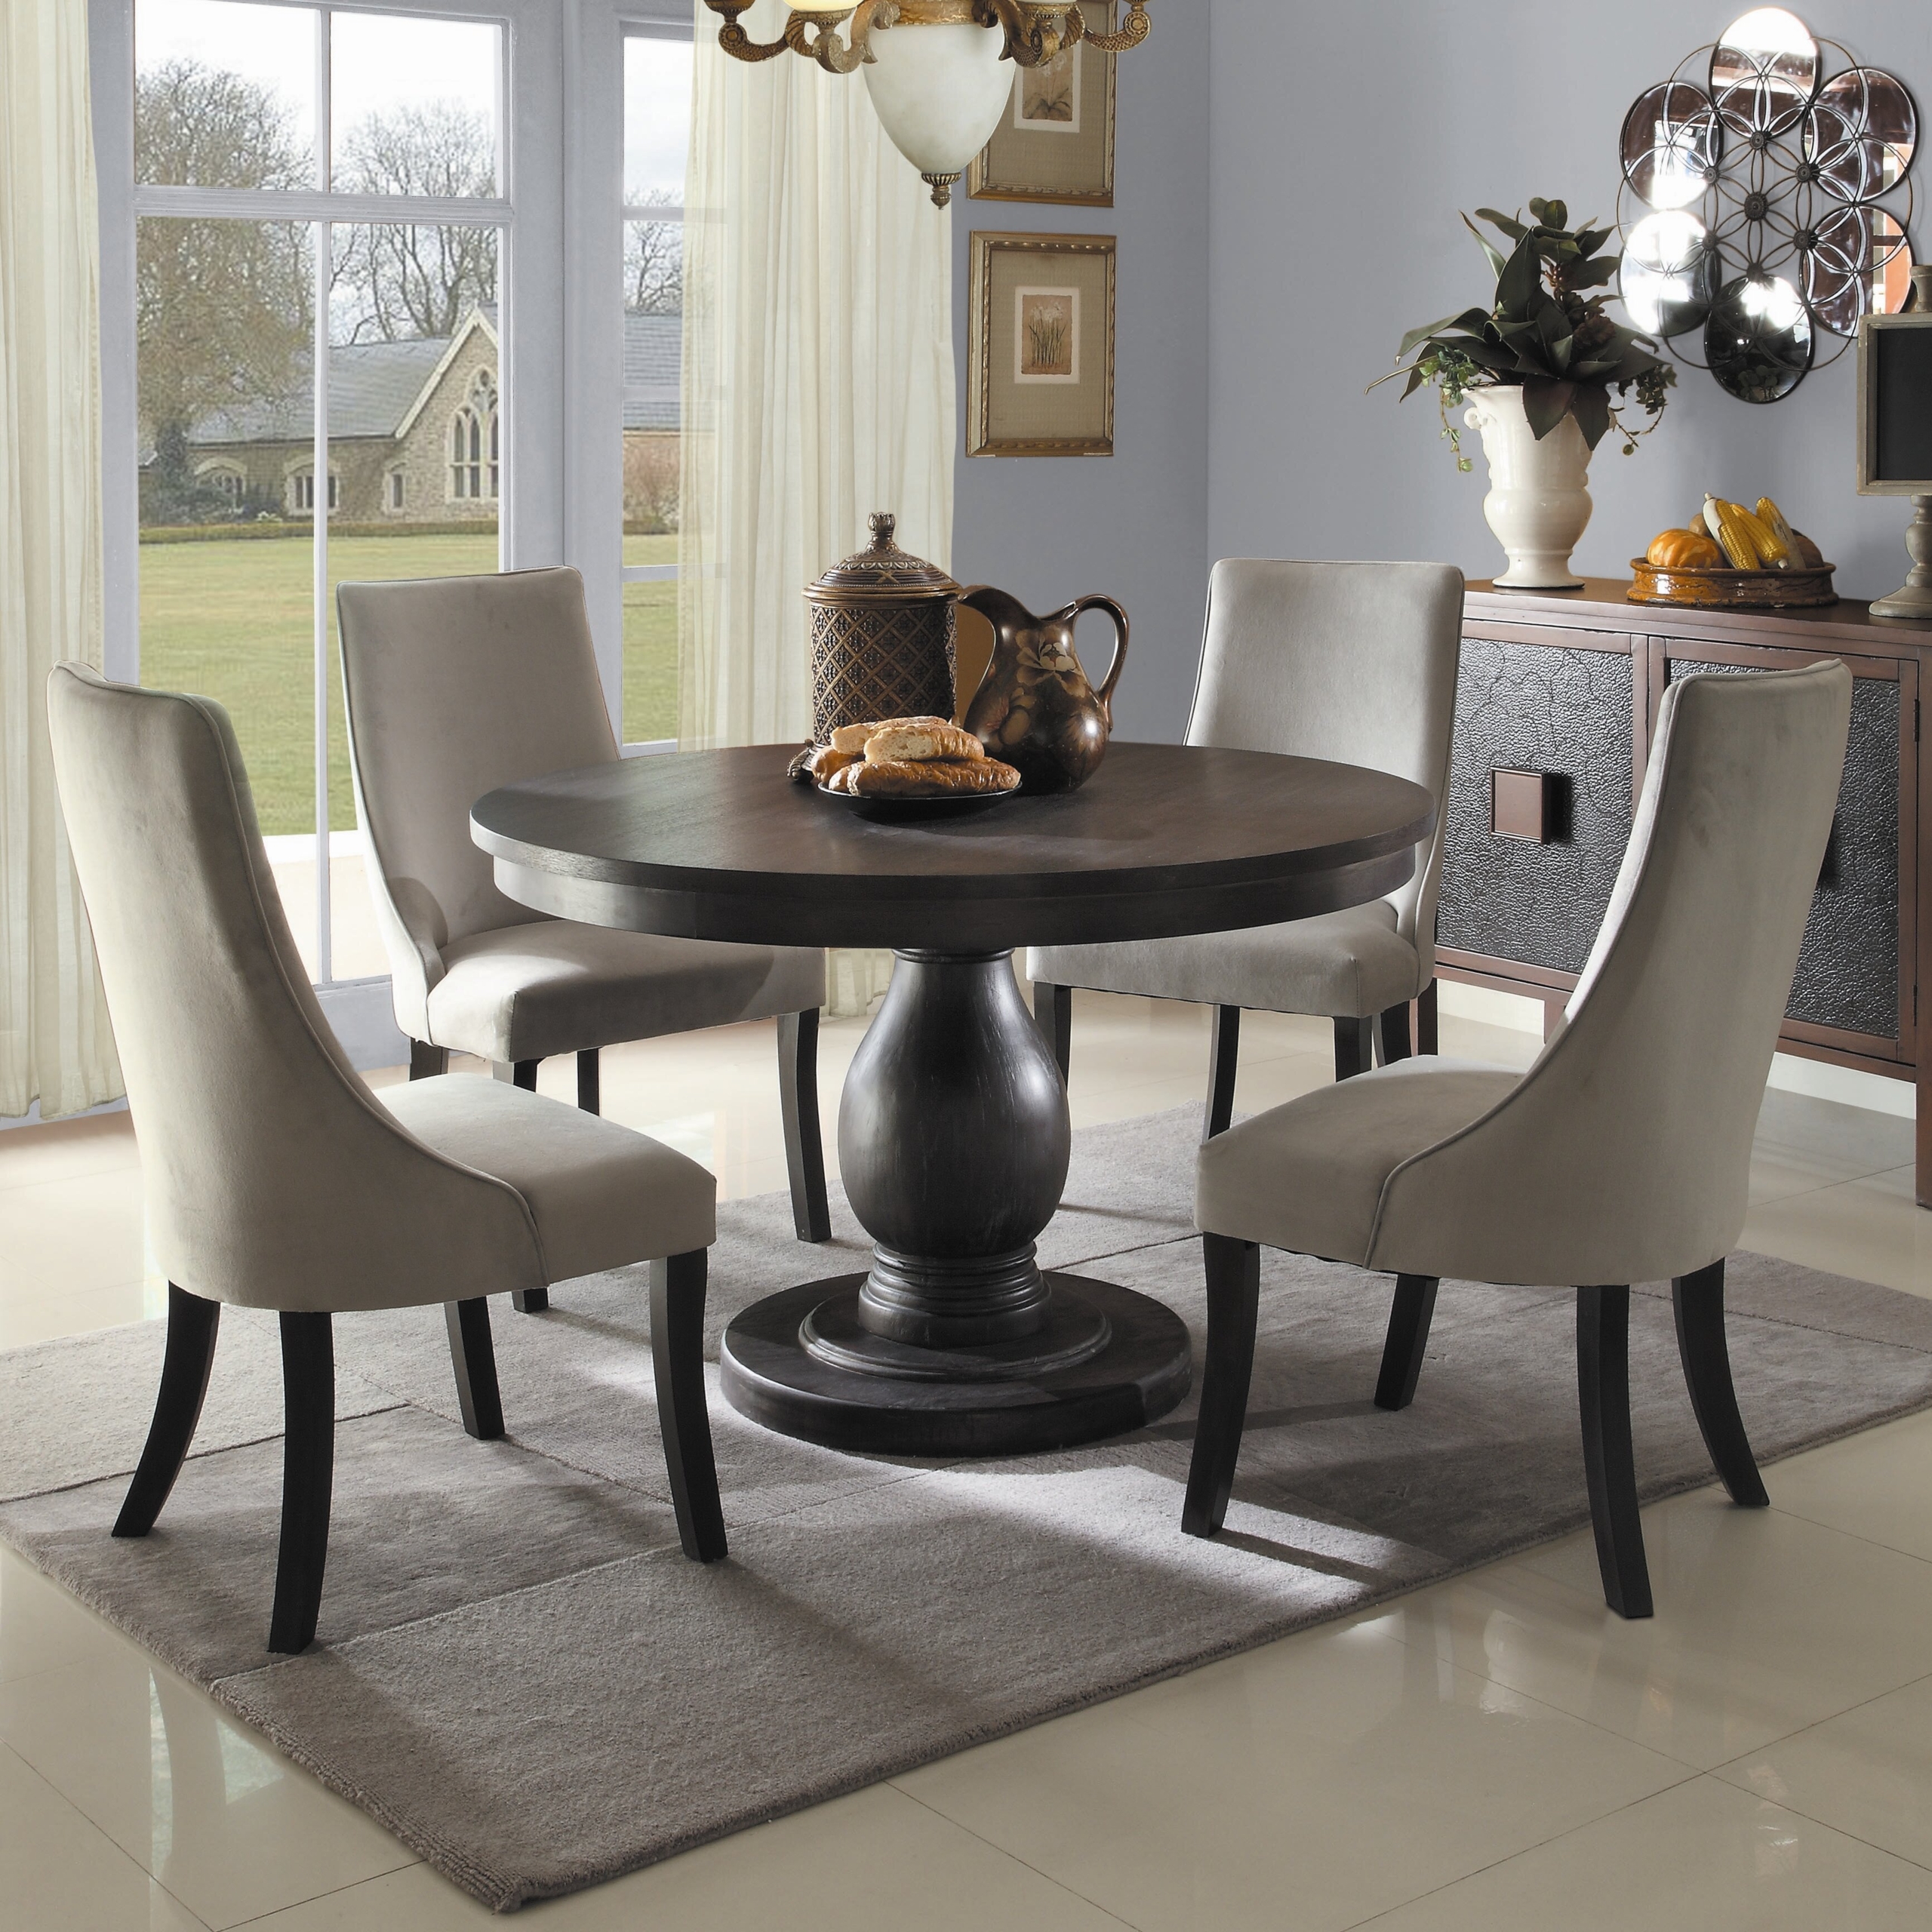 48 Inch Round Dining Table Visualhunt, Round 48 Dining Table Set